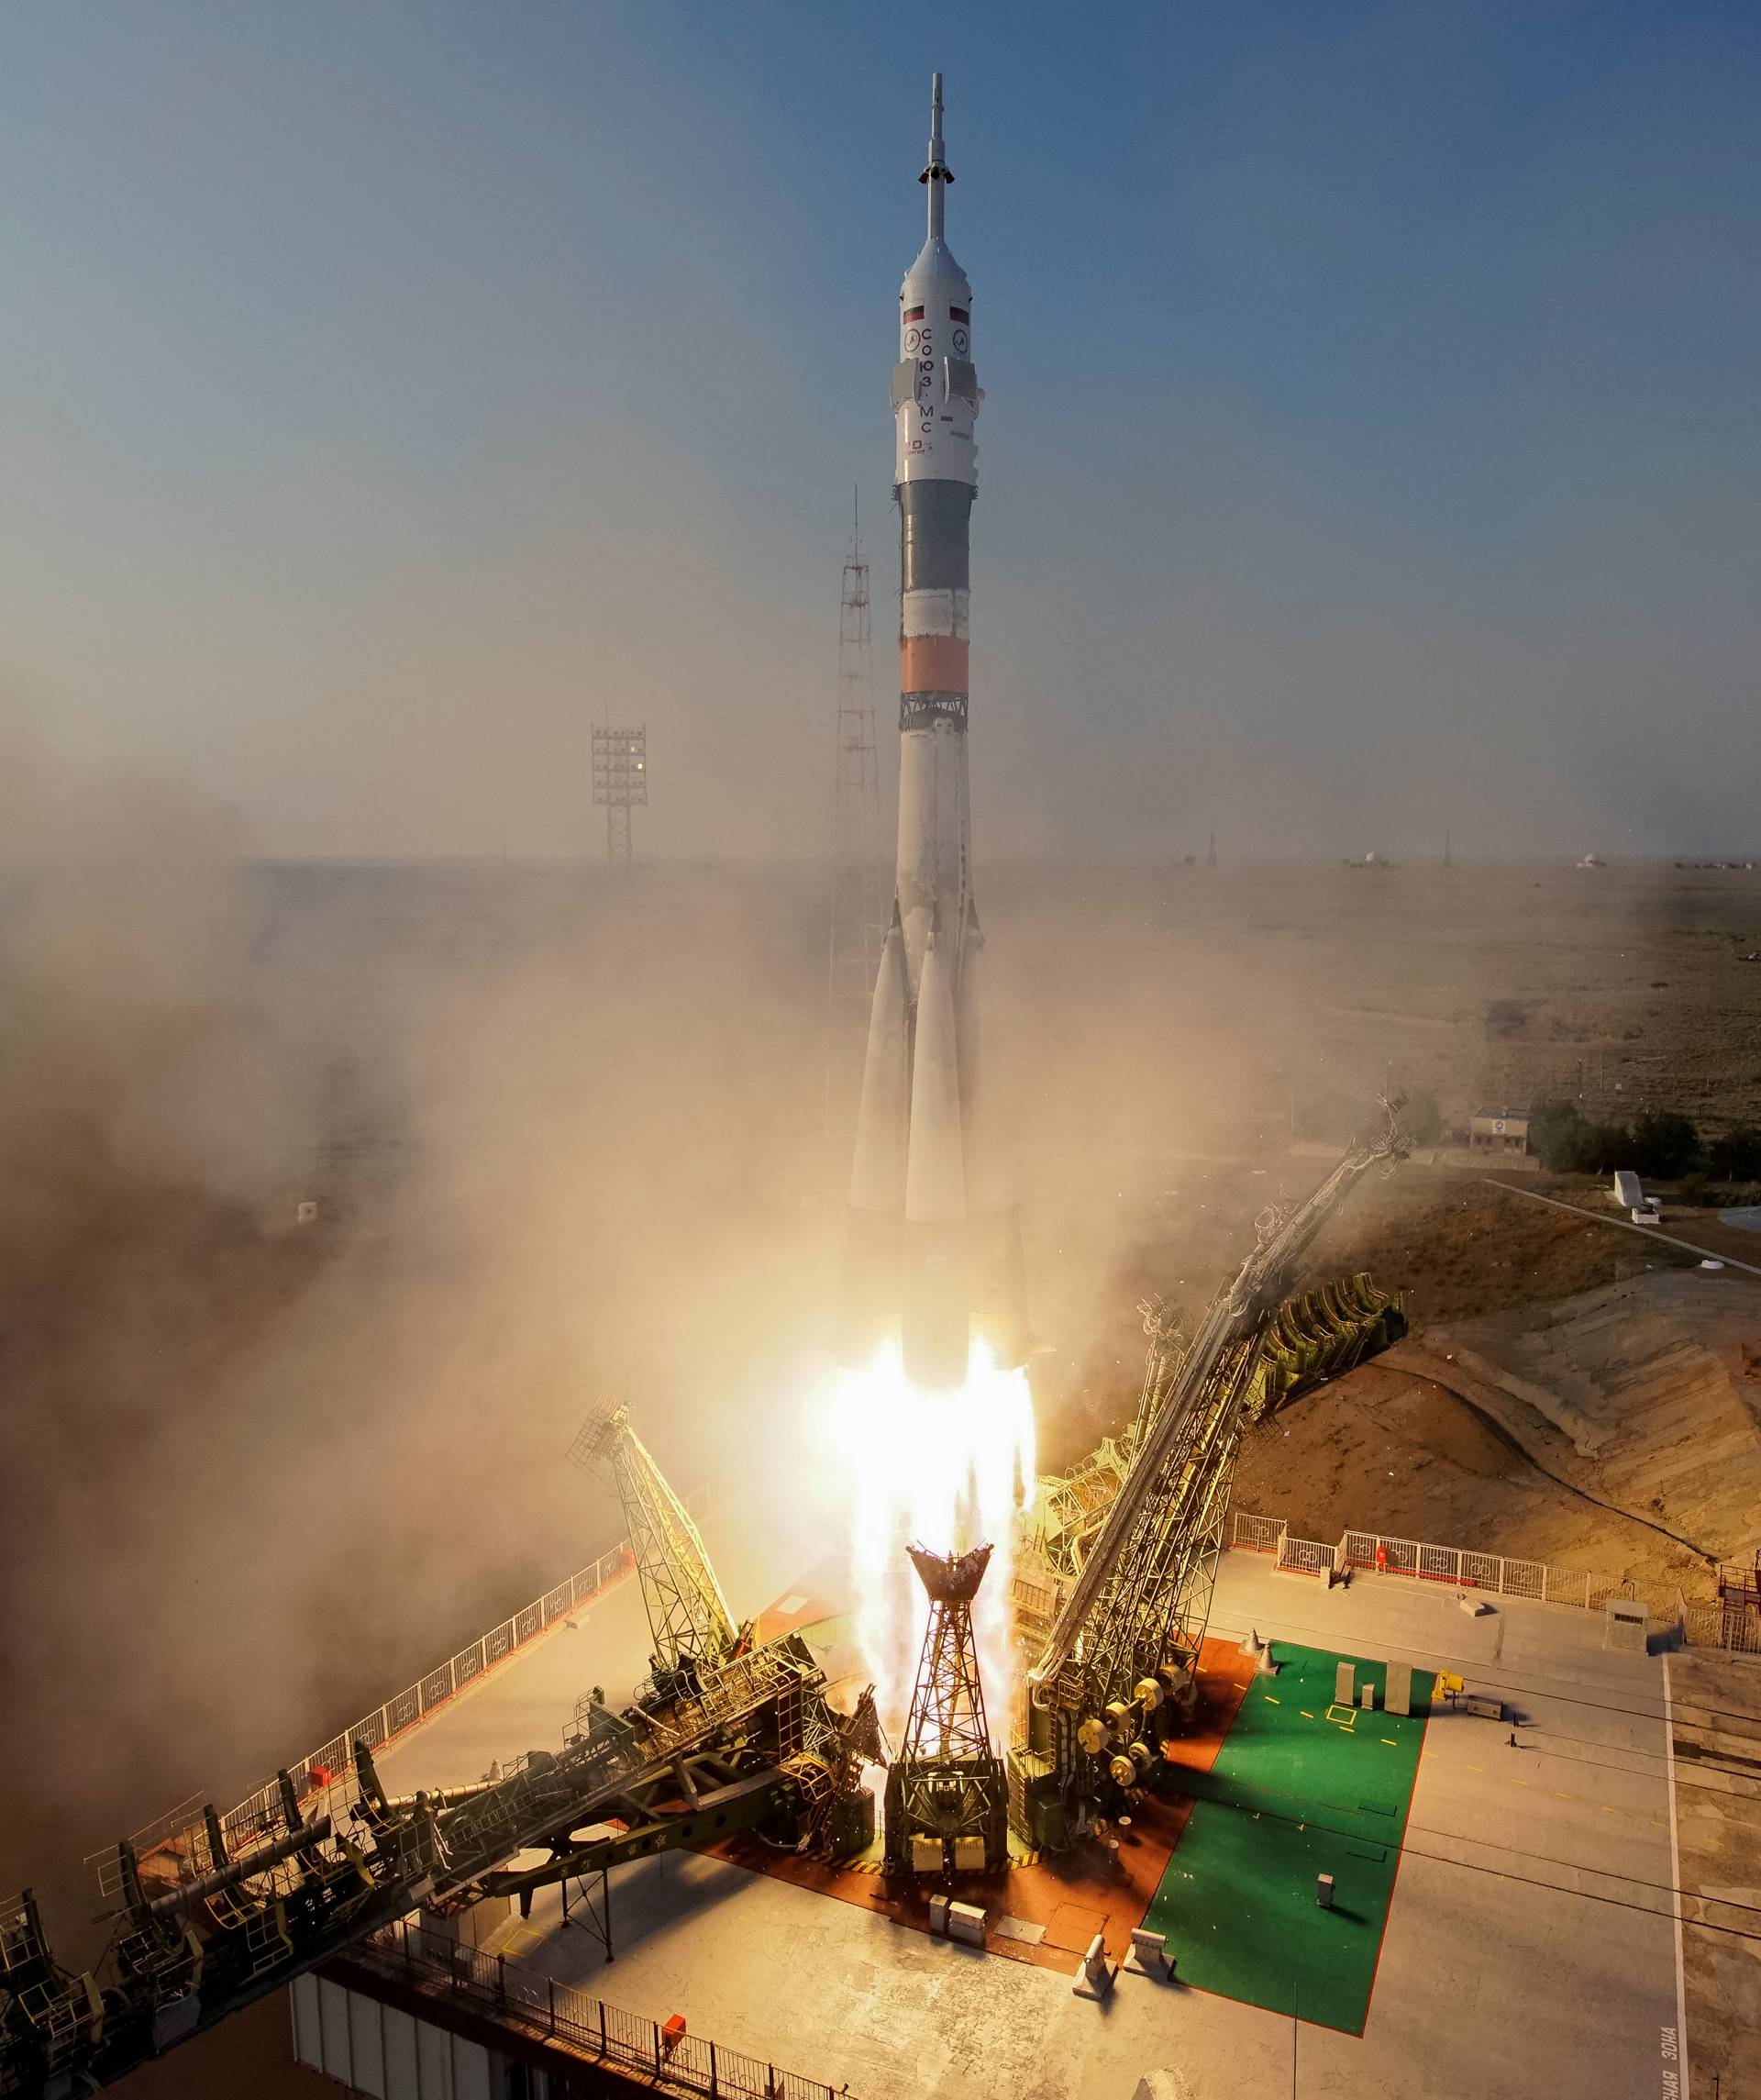 The Soyuz MS spacecraft carrying the crew of Kate Rubins of the U.S., Anatoly Ivanishin of Russia and Takuya Onishi of Japan blasts off to the International Space Station (ISS) from the launchpad at the Baikonur cosmodrome, Kazakhstan